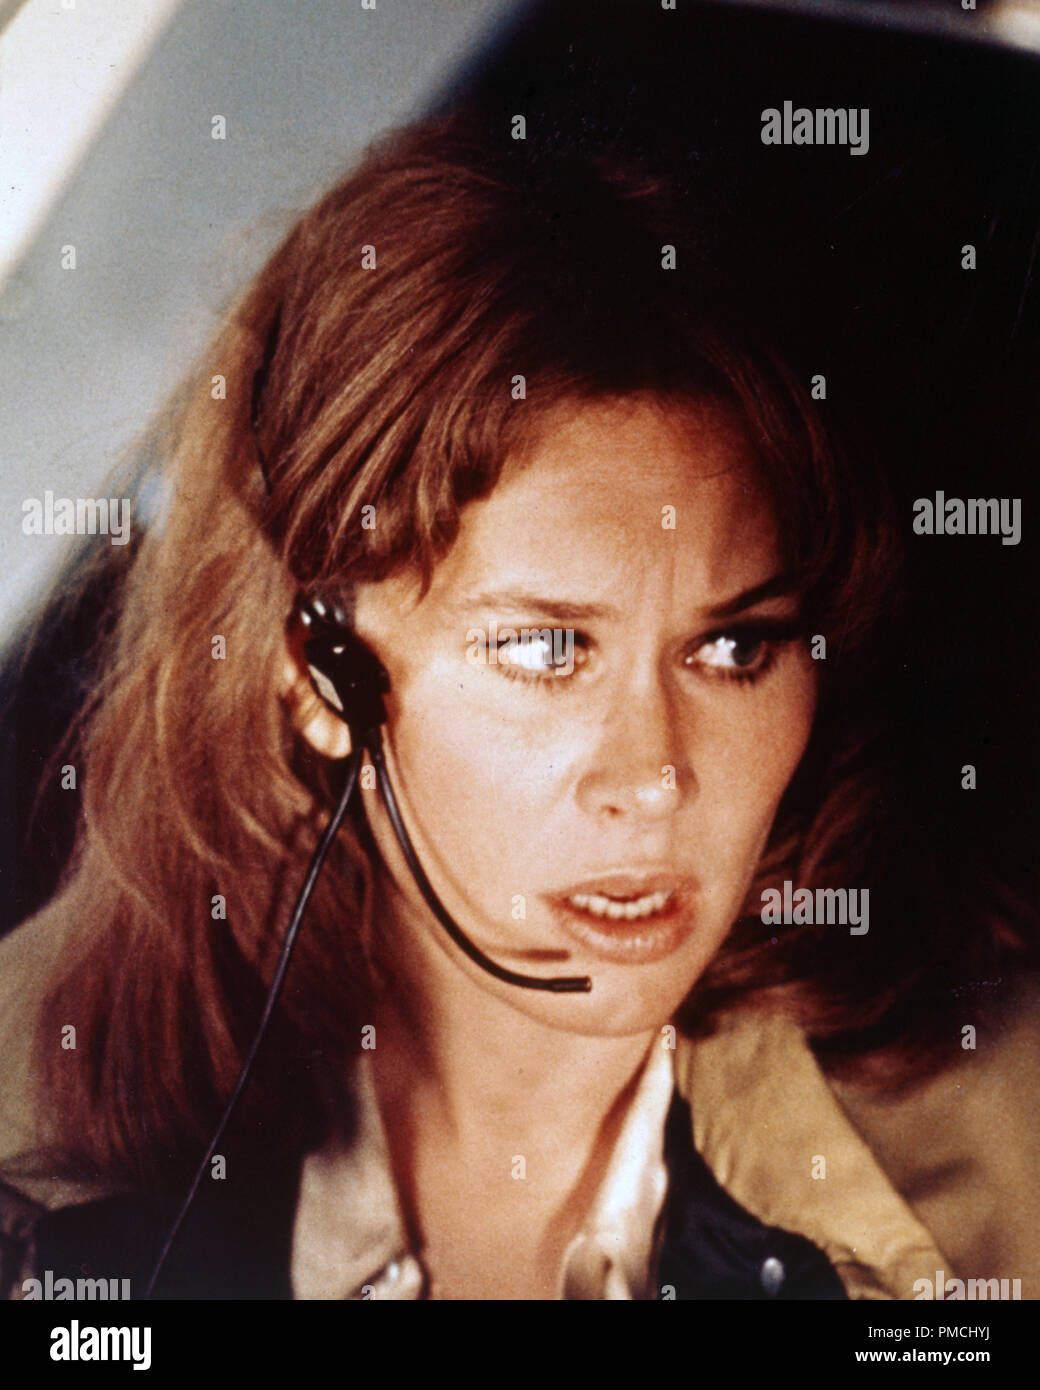 Karen Black, "Airport 1975" (1974) Universal Pictures File Reference #  33650 091THA For Editorial Use Only - All Rights Reserved Stock Photo -  Alamy